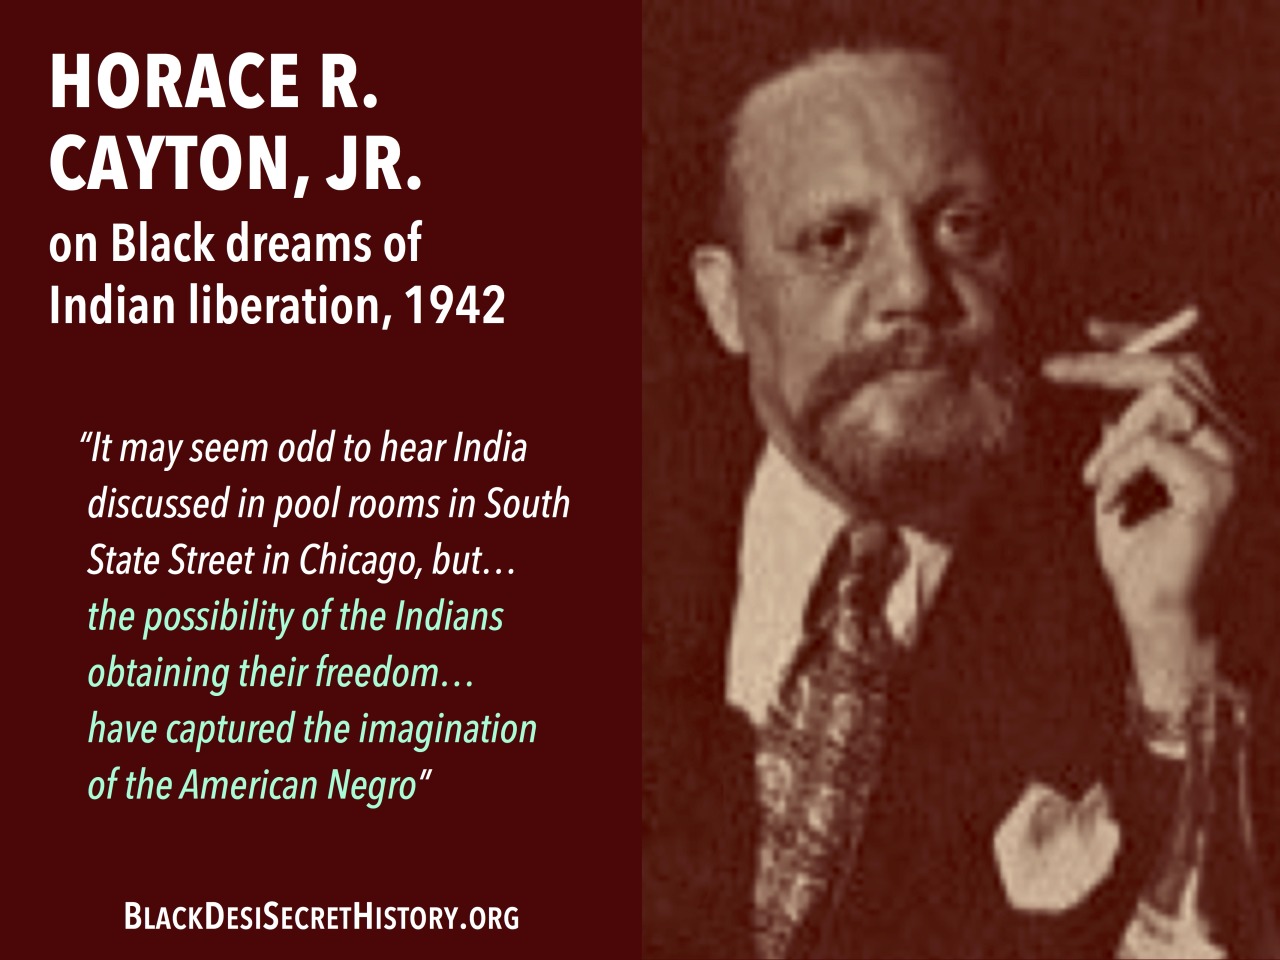 HORACE R. CAYTON, JR. on Black dreams of Indian liberation, 1942: “It may seem odd to hear India discussed in pool rooms in South State Street in Chicago, but… the possibility of the Indians obtaining their freedom… have captured the imagination of the American Negro”